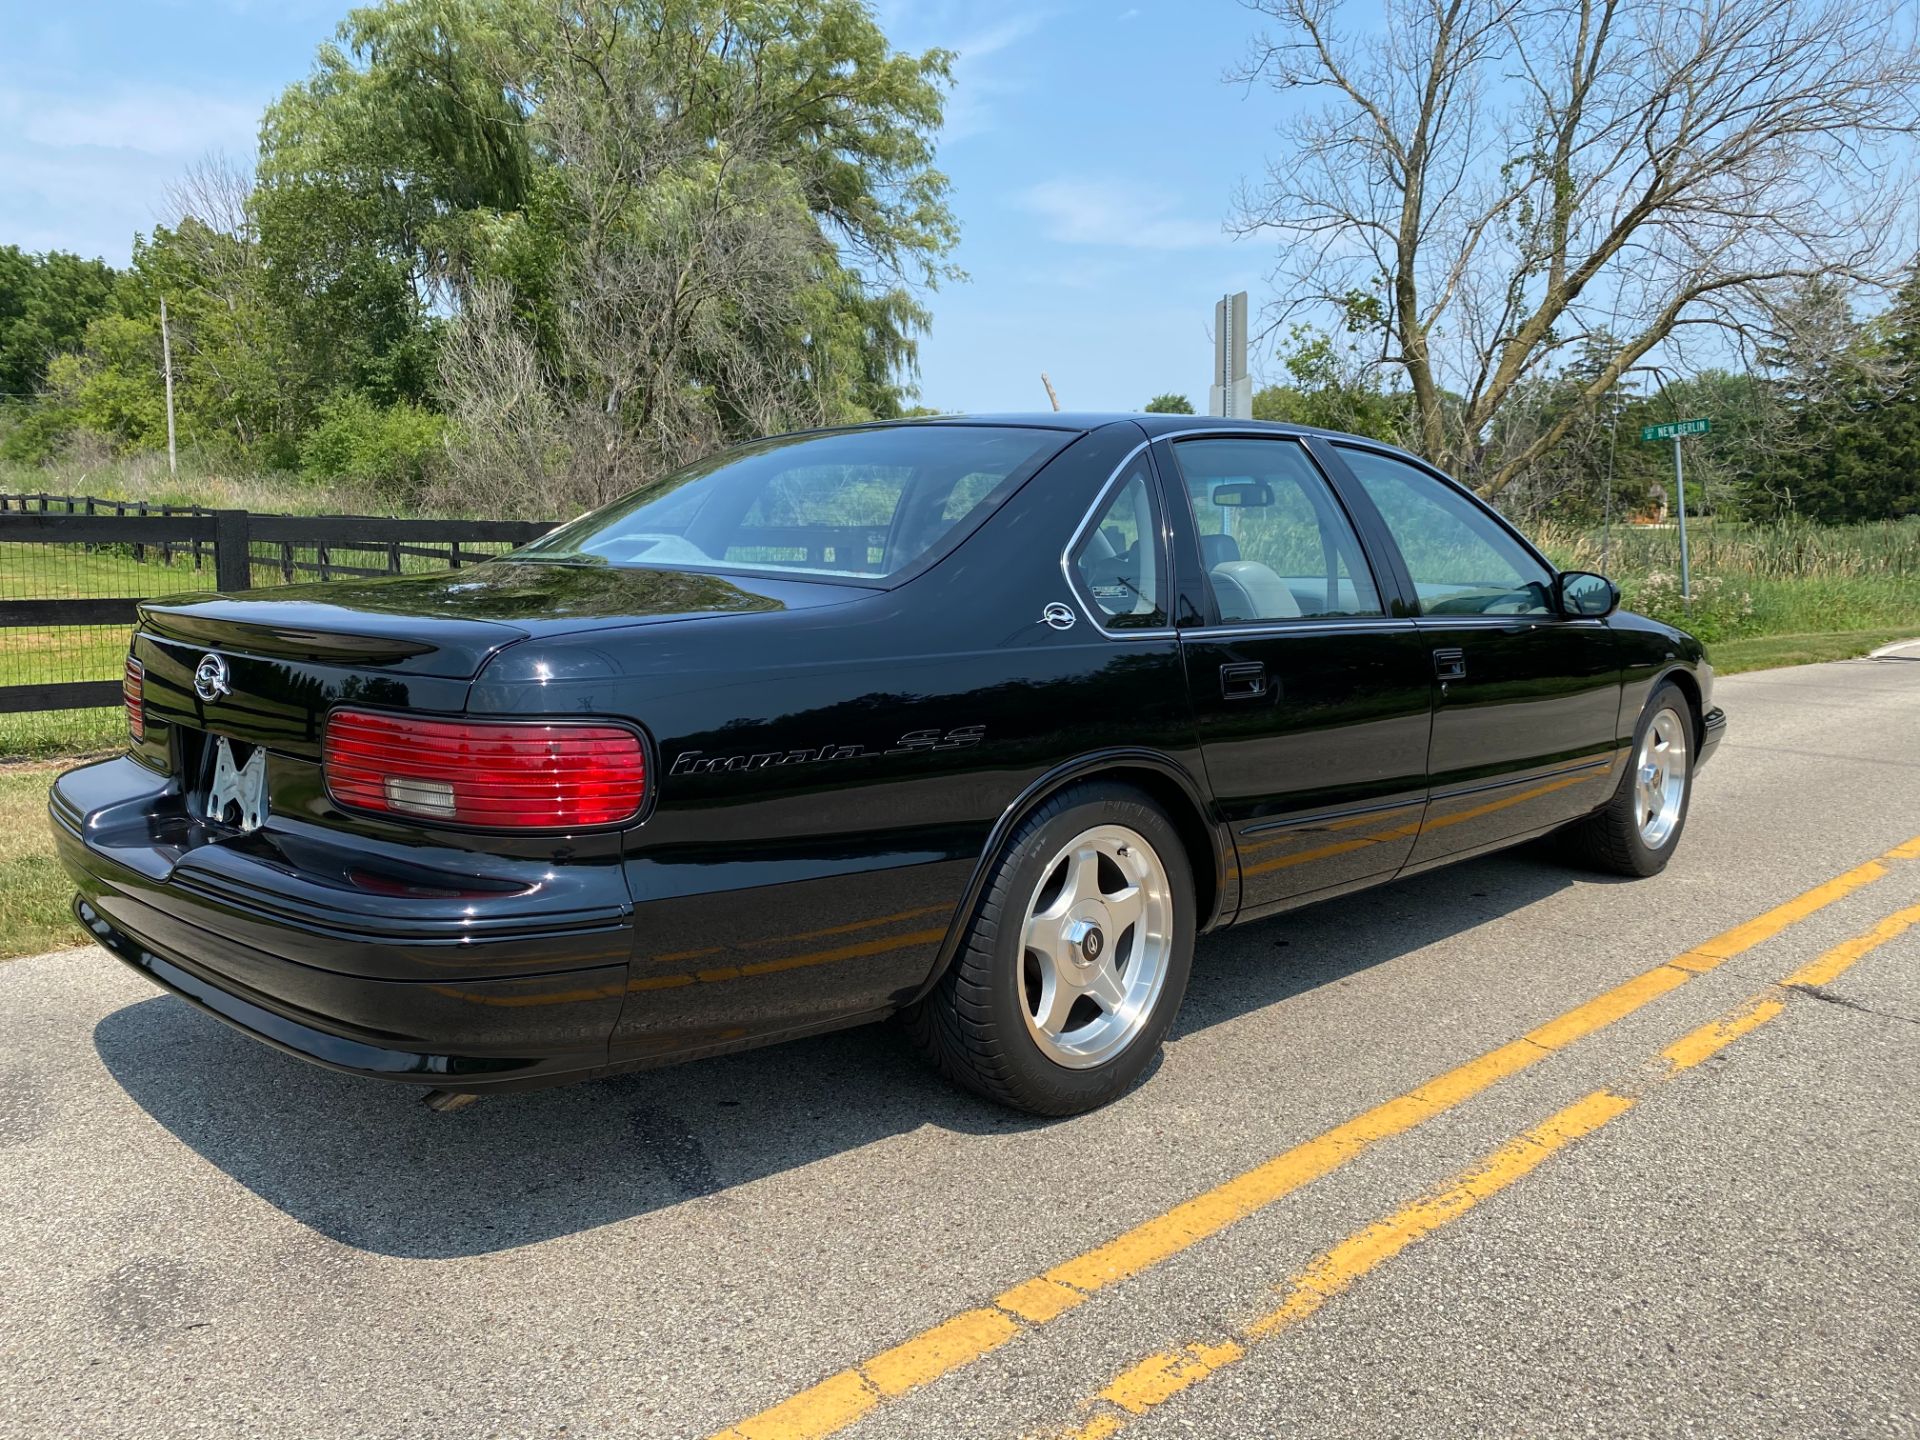 1996 Chevrolet Impala SS in Big Bend, Wisconsin - Photo 24